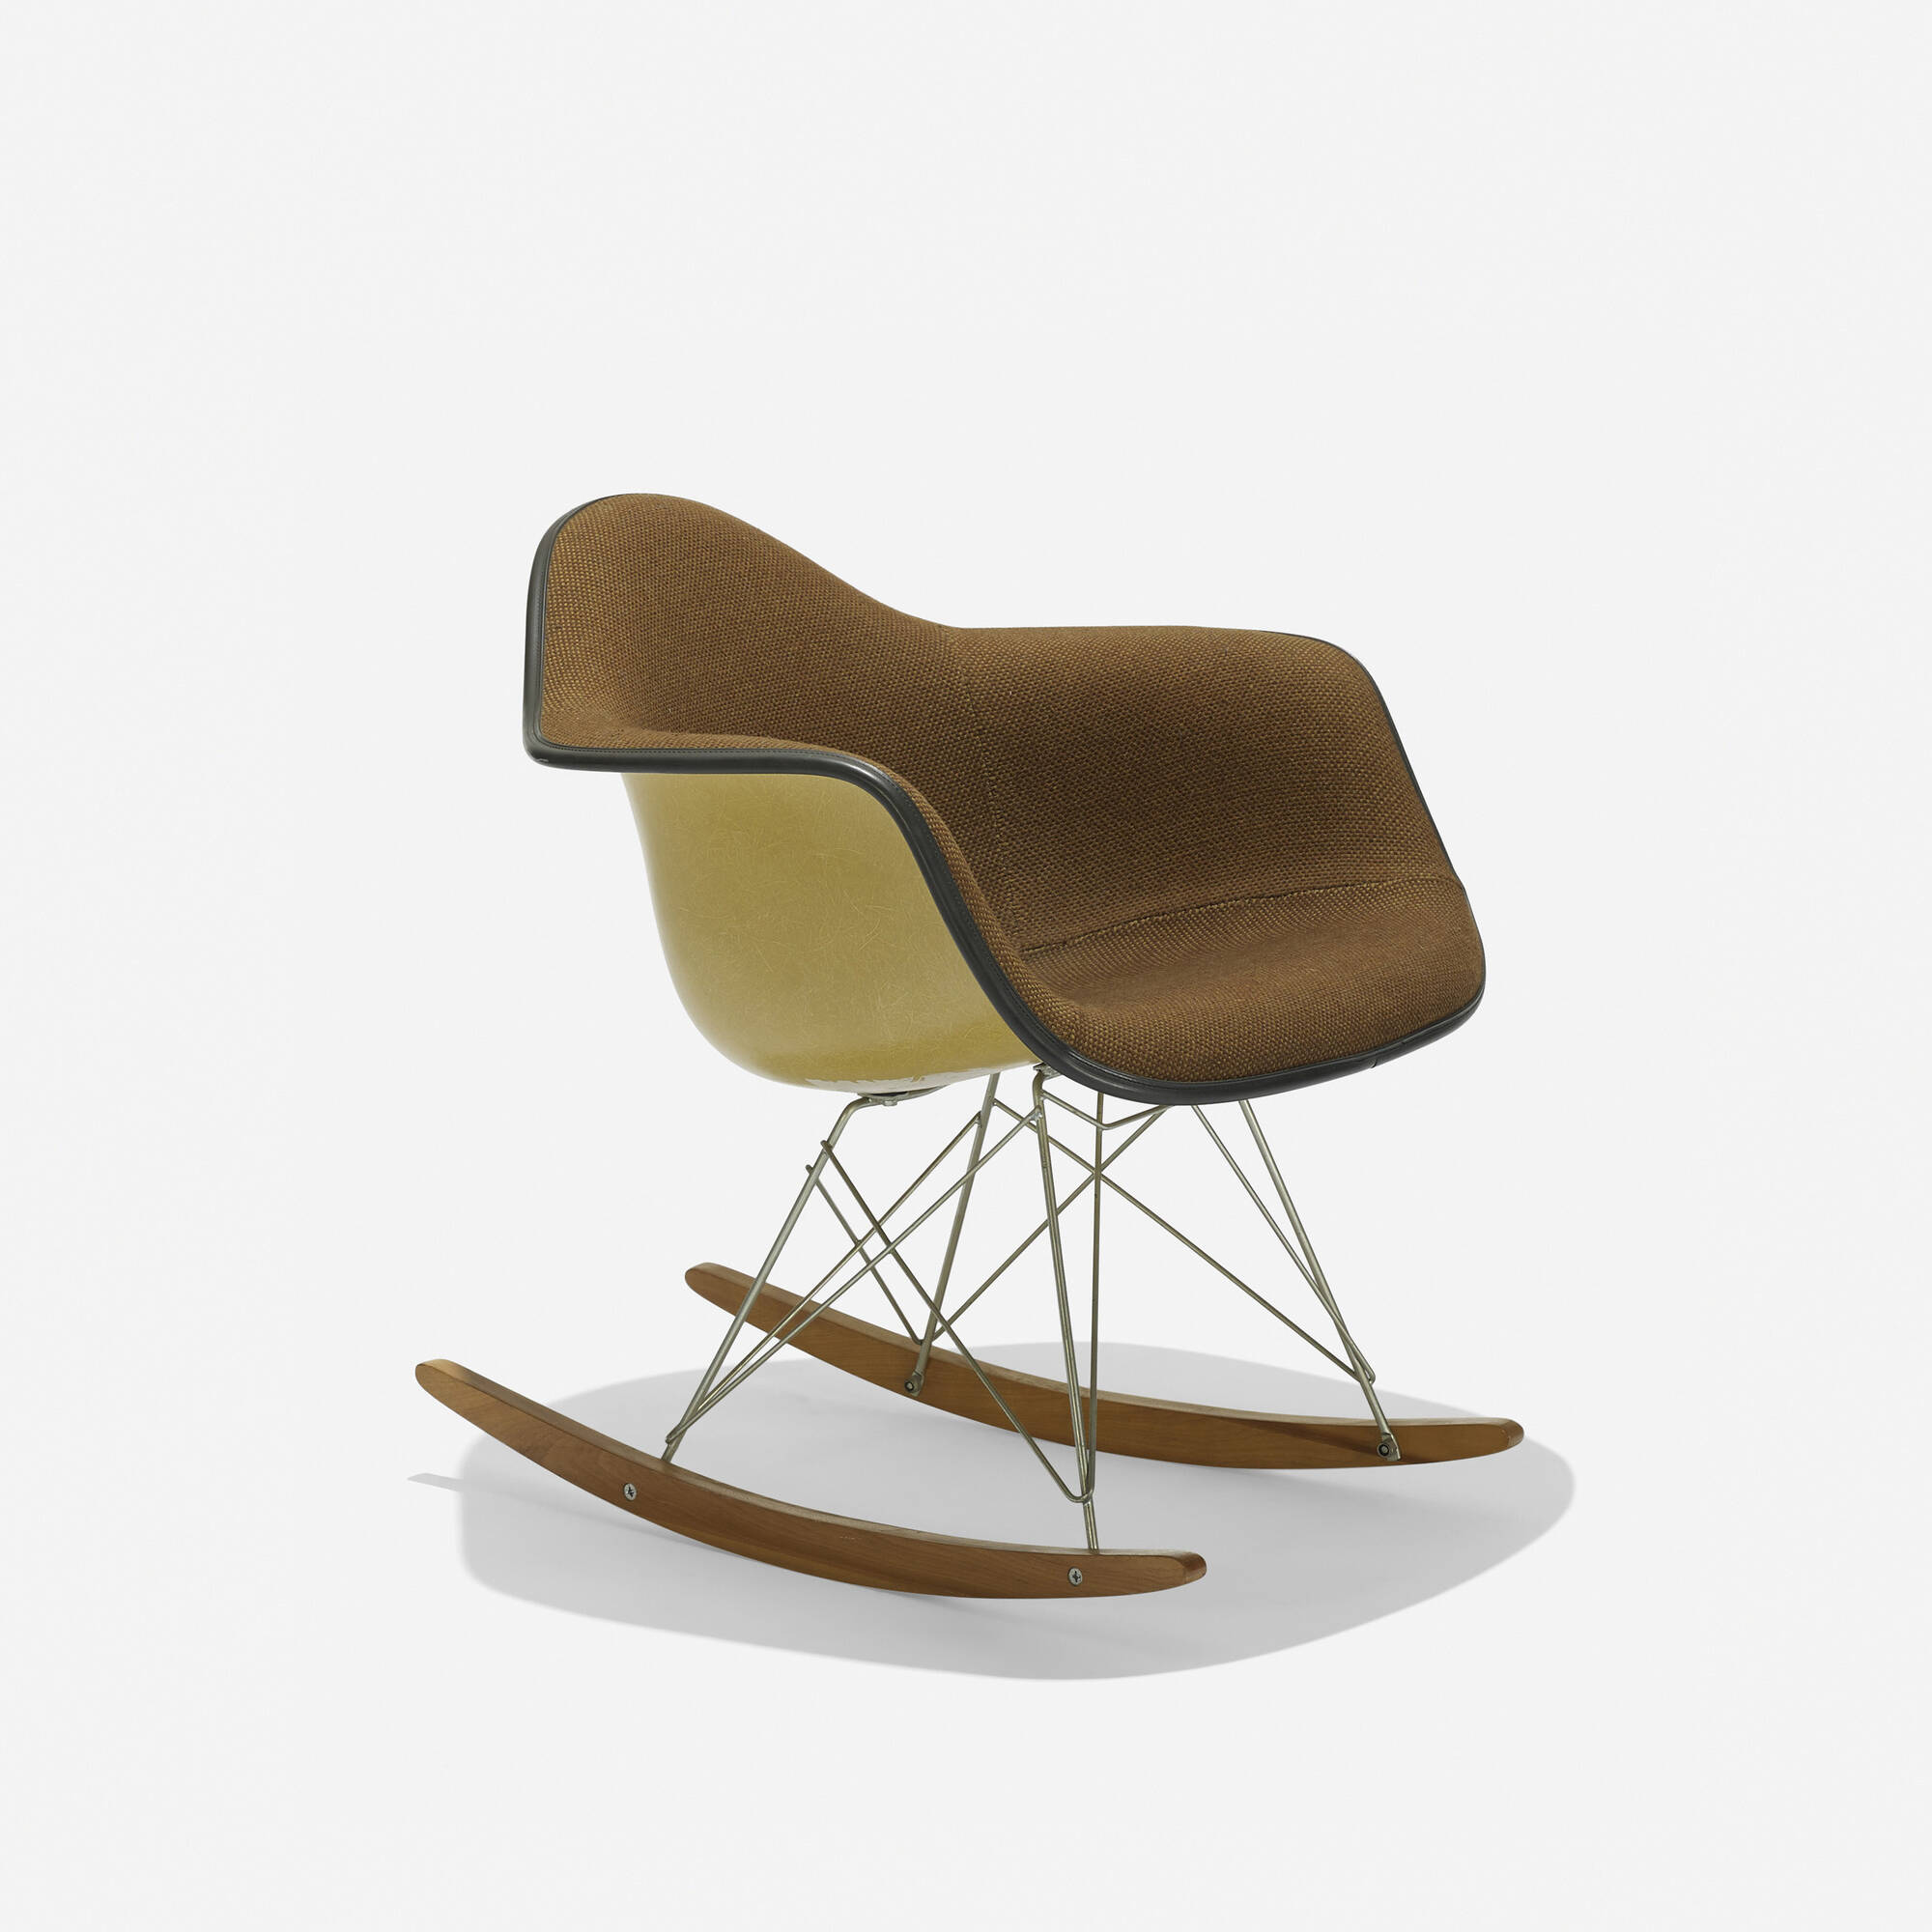 118: CHARLES AND RAY EAMES, RAR-1 < Eames Design: The JF Chen